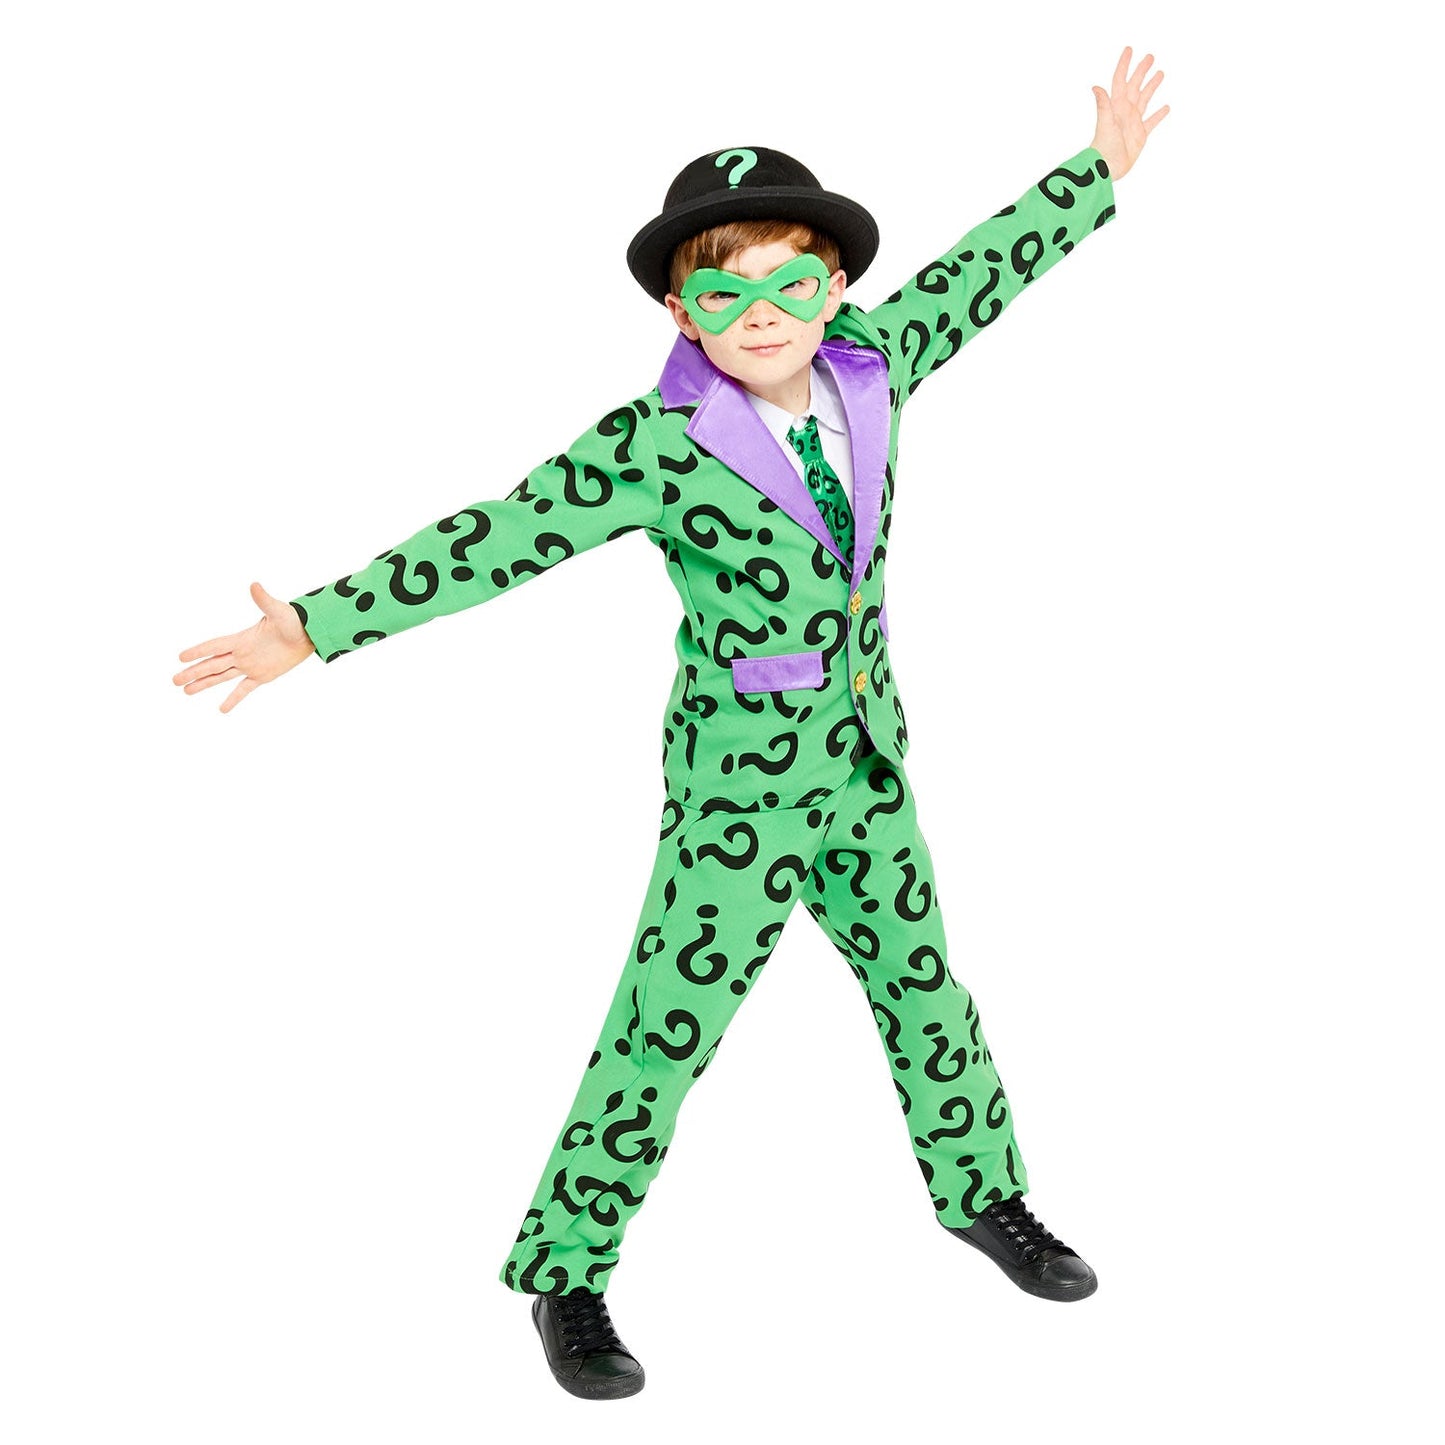 Child The Riddler Costume includes jacket, trousers, mock shirt with tie, moulded hat and eyemask